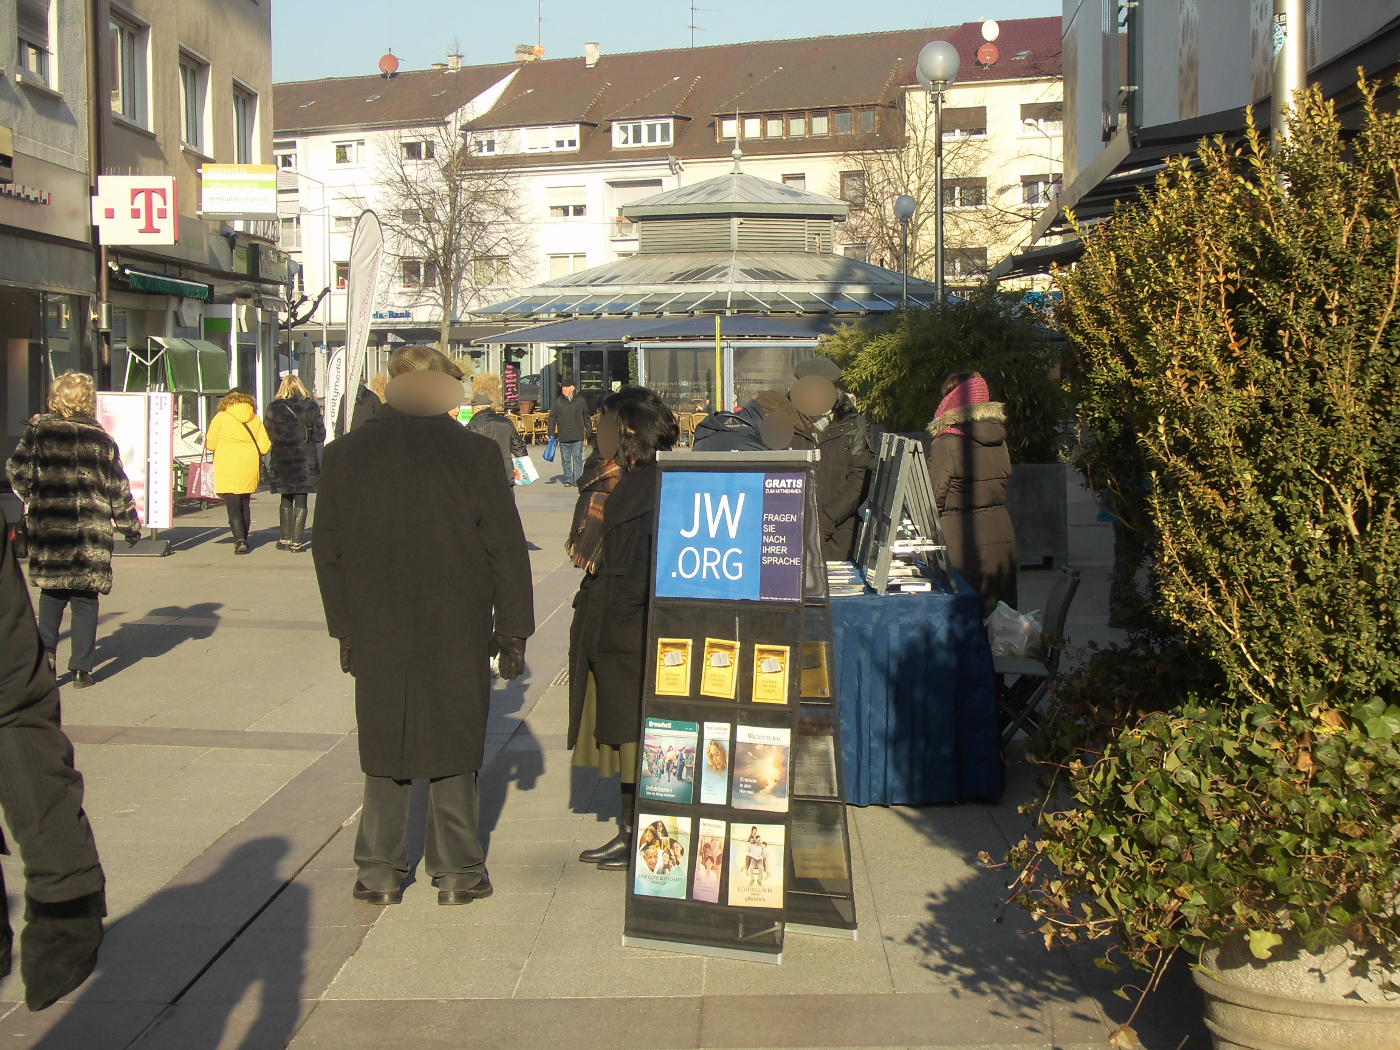 Bruchsal Jehovah's Witnesses consider themselves wise